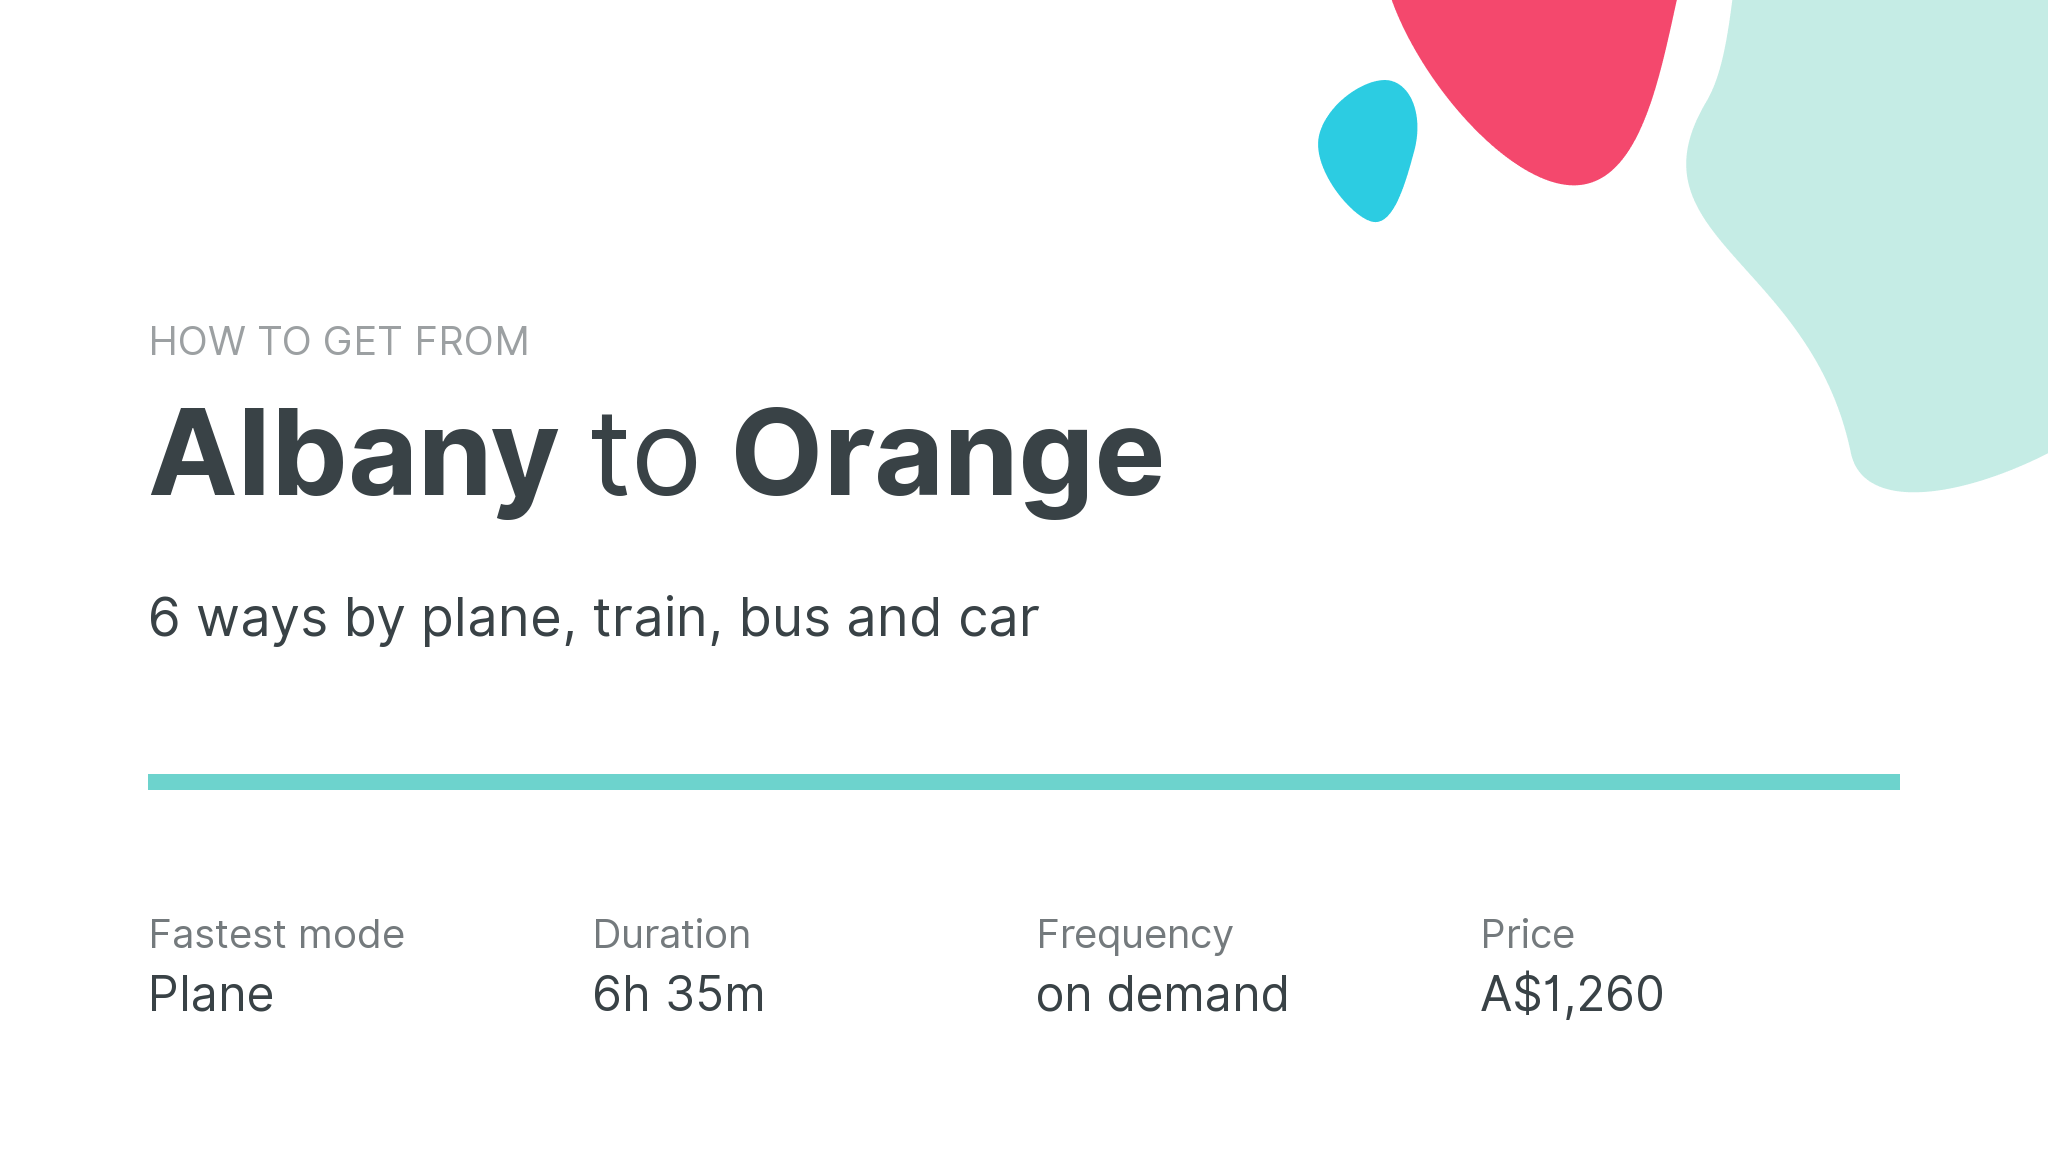 How do I get from Albany to Orange